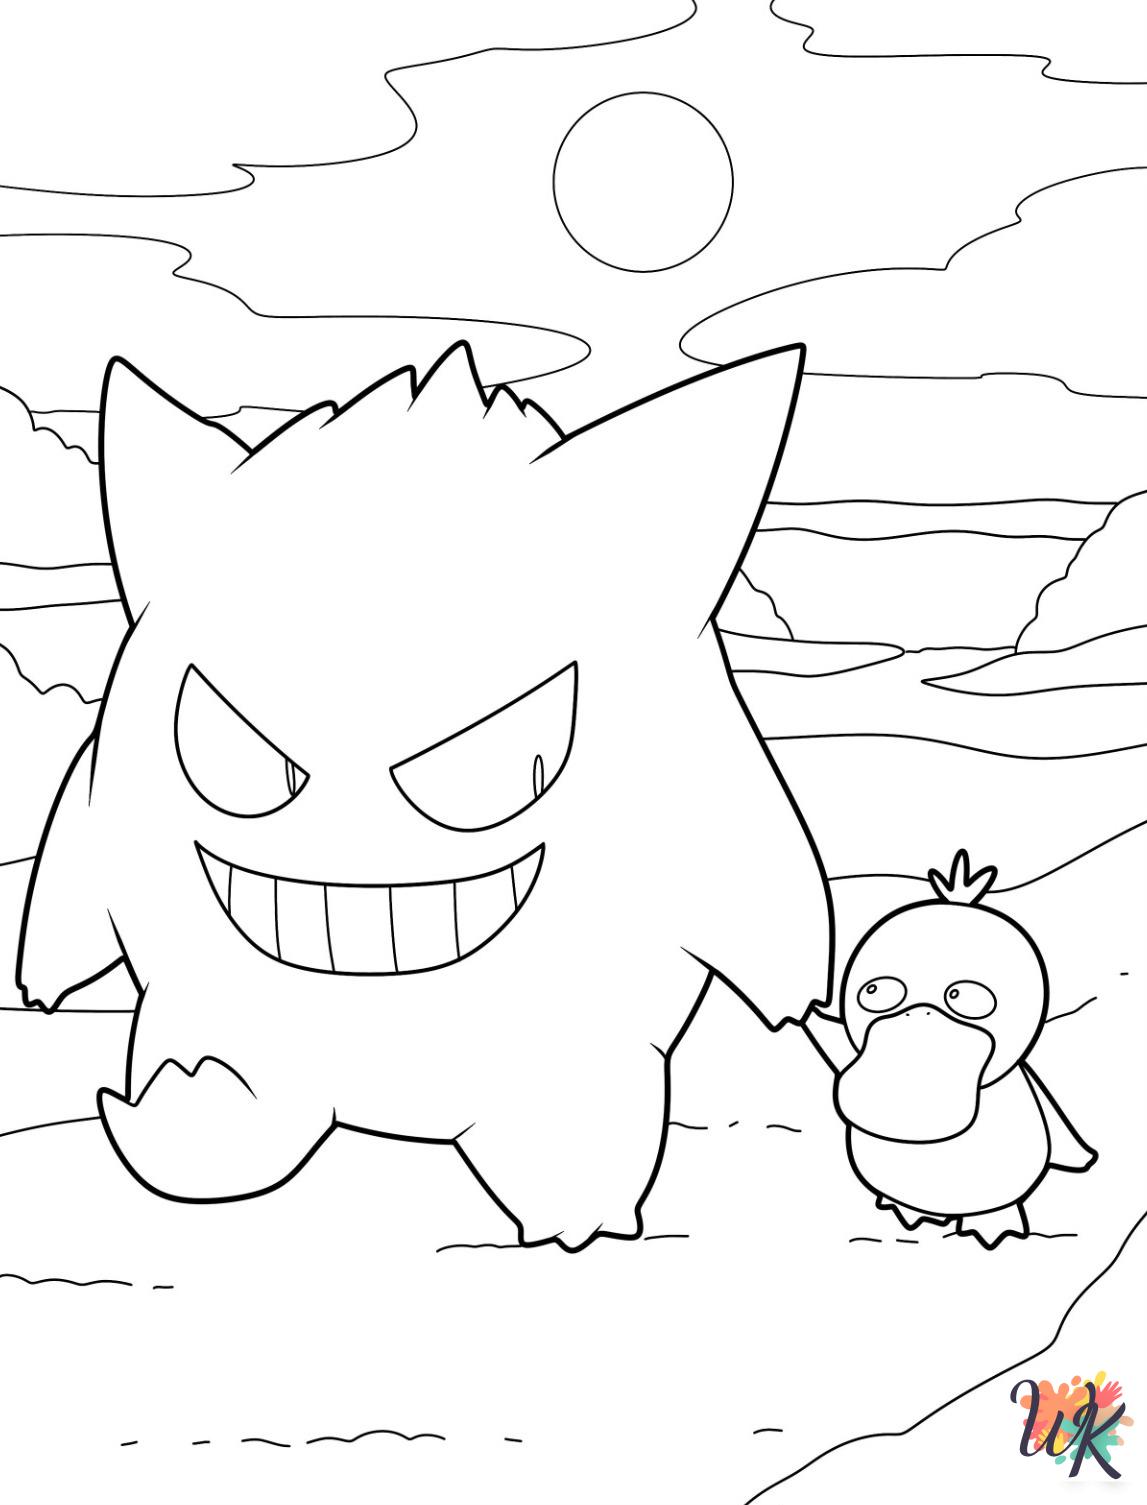 free full size printable Gengar coloring pages for adults pdf